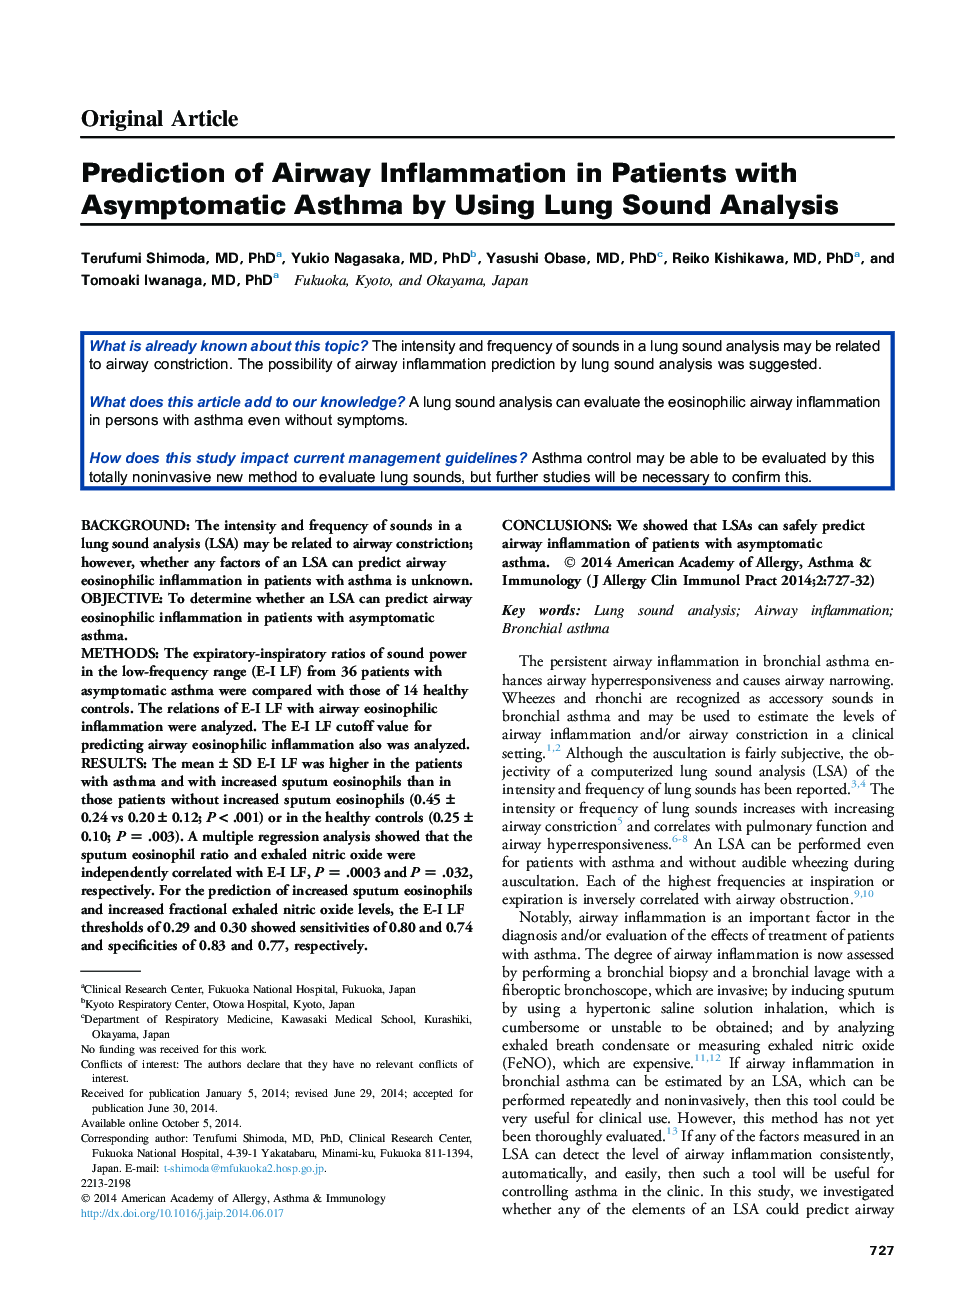 Prediction of Airway Inflammation in Patients with Asymptomatic Asthma by Using Lung Sound Analysis